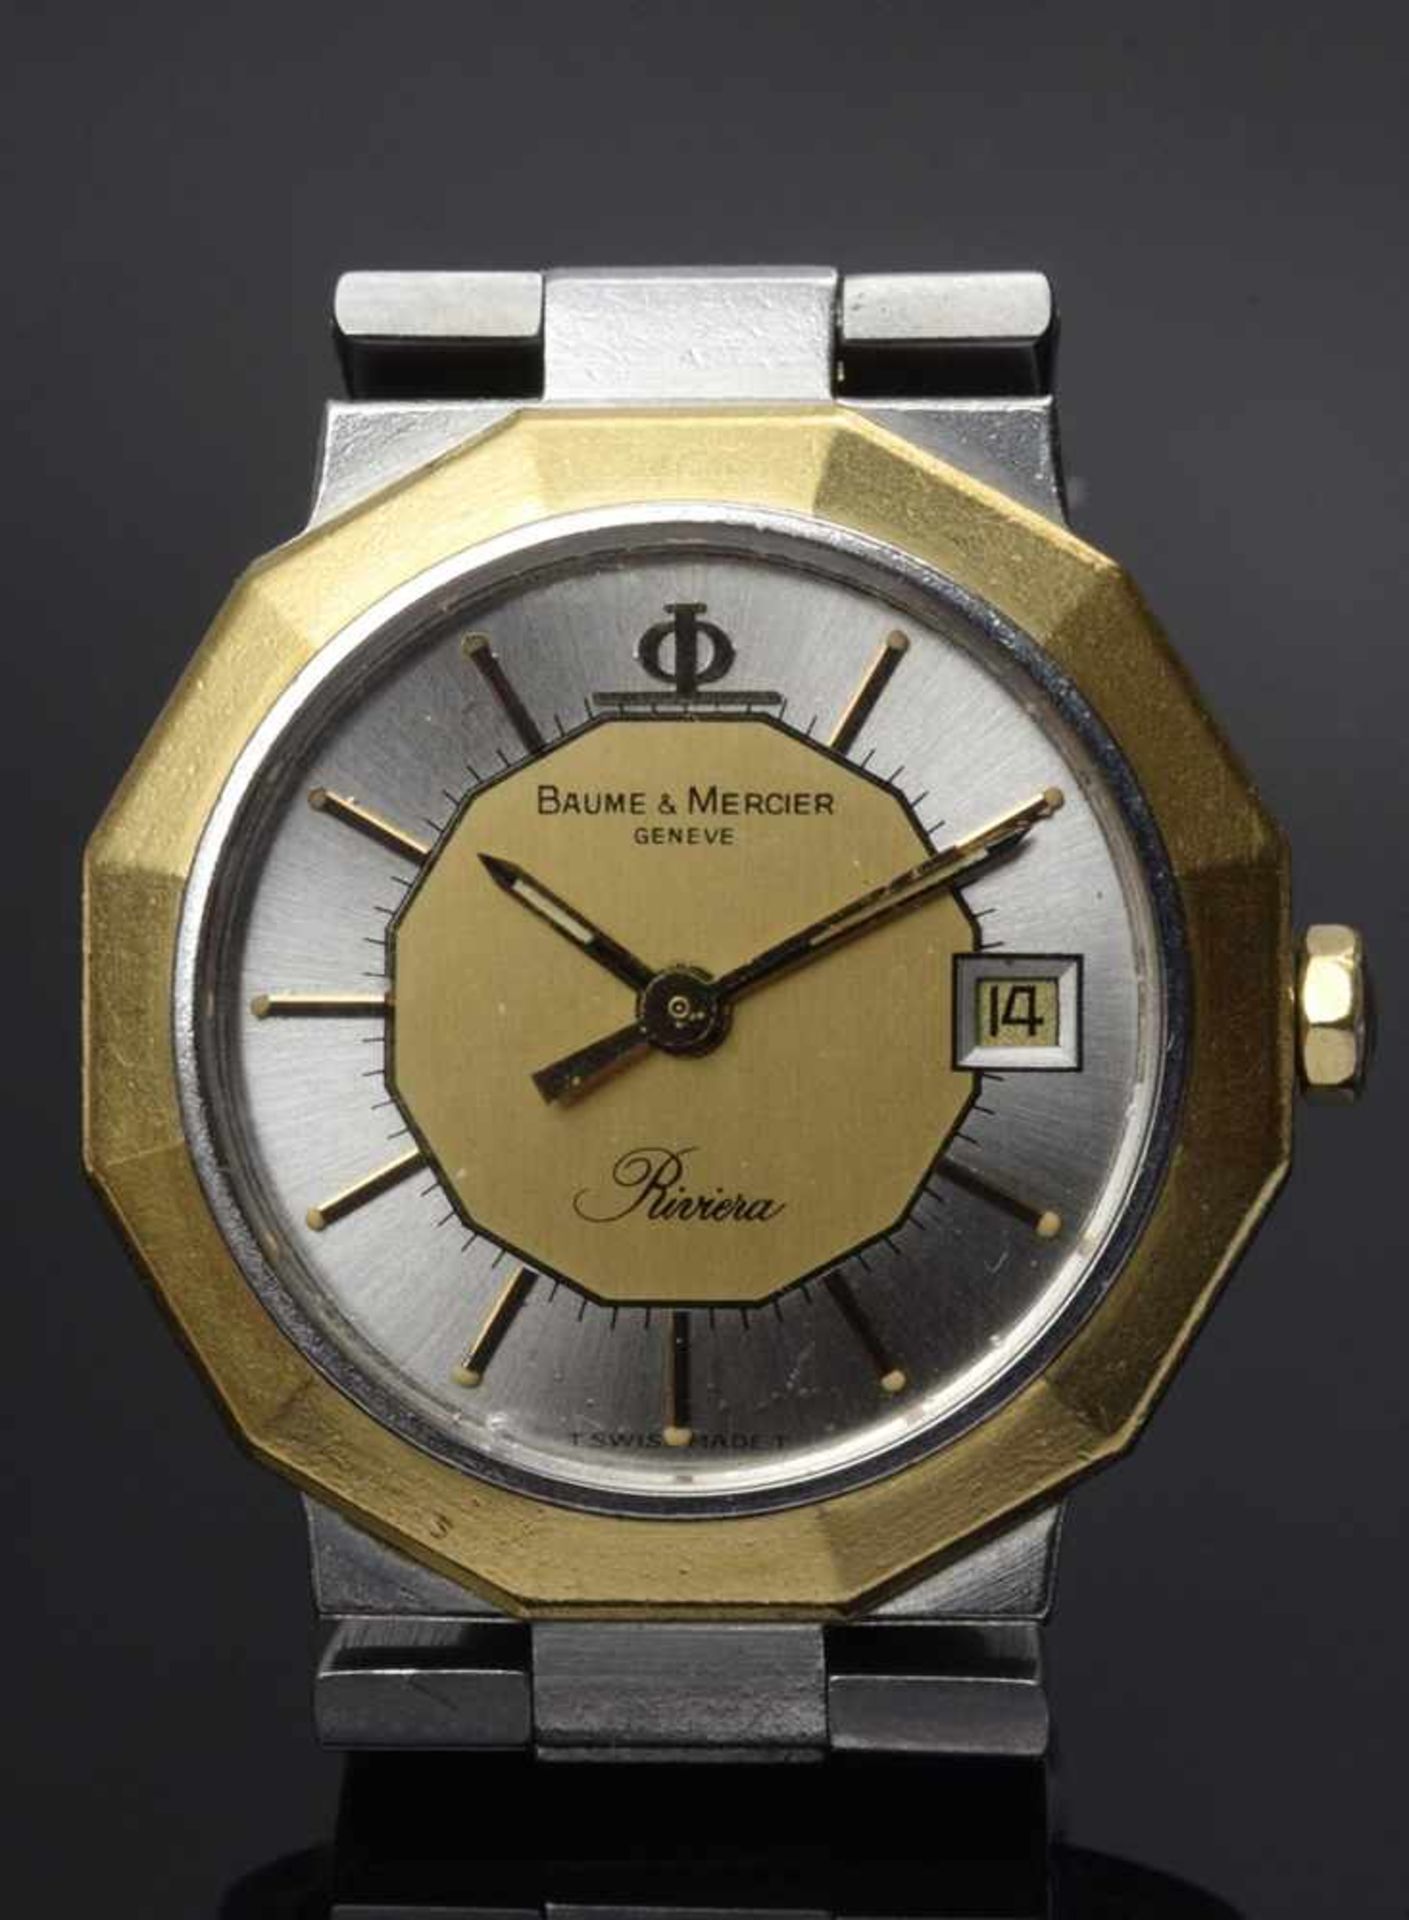 Baume & Mercier "Riviera" ladies' watch, stainless steel/gold, quartz movement, central second hand, - Image 2 of 4